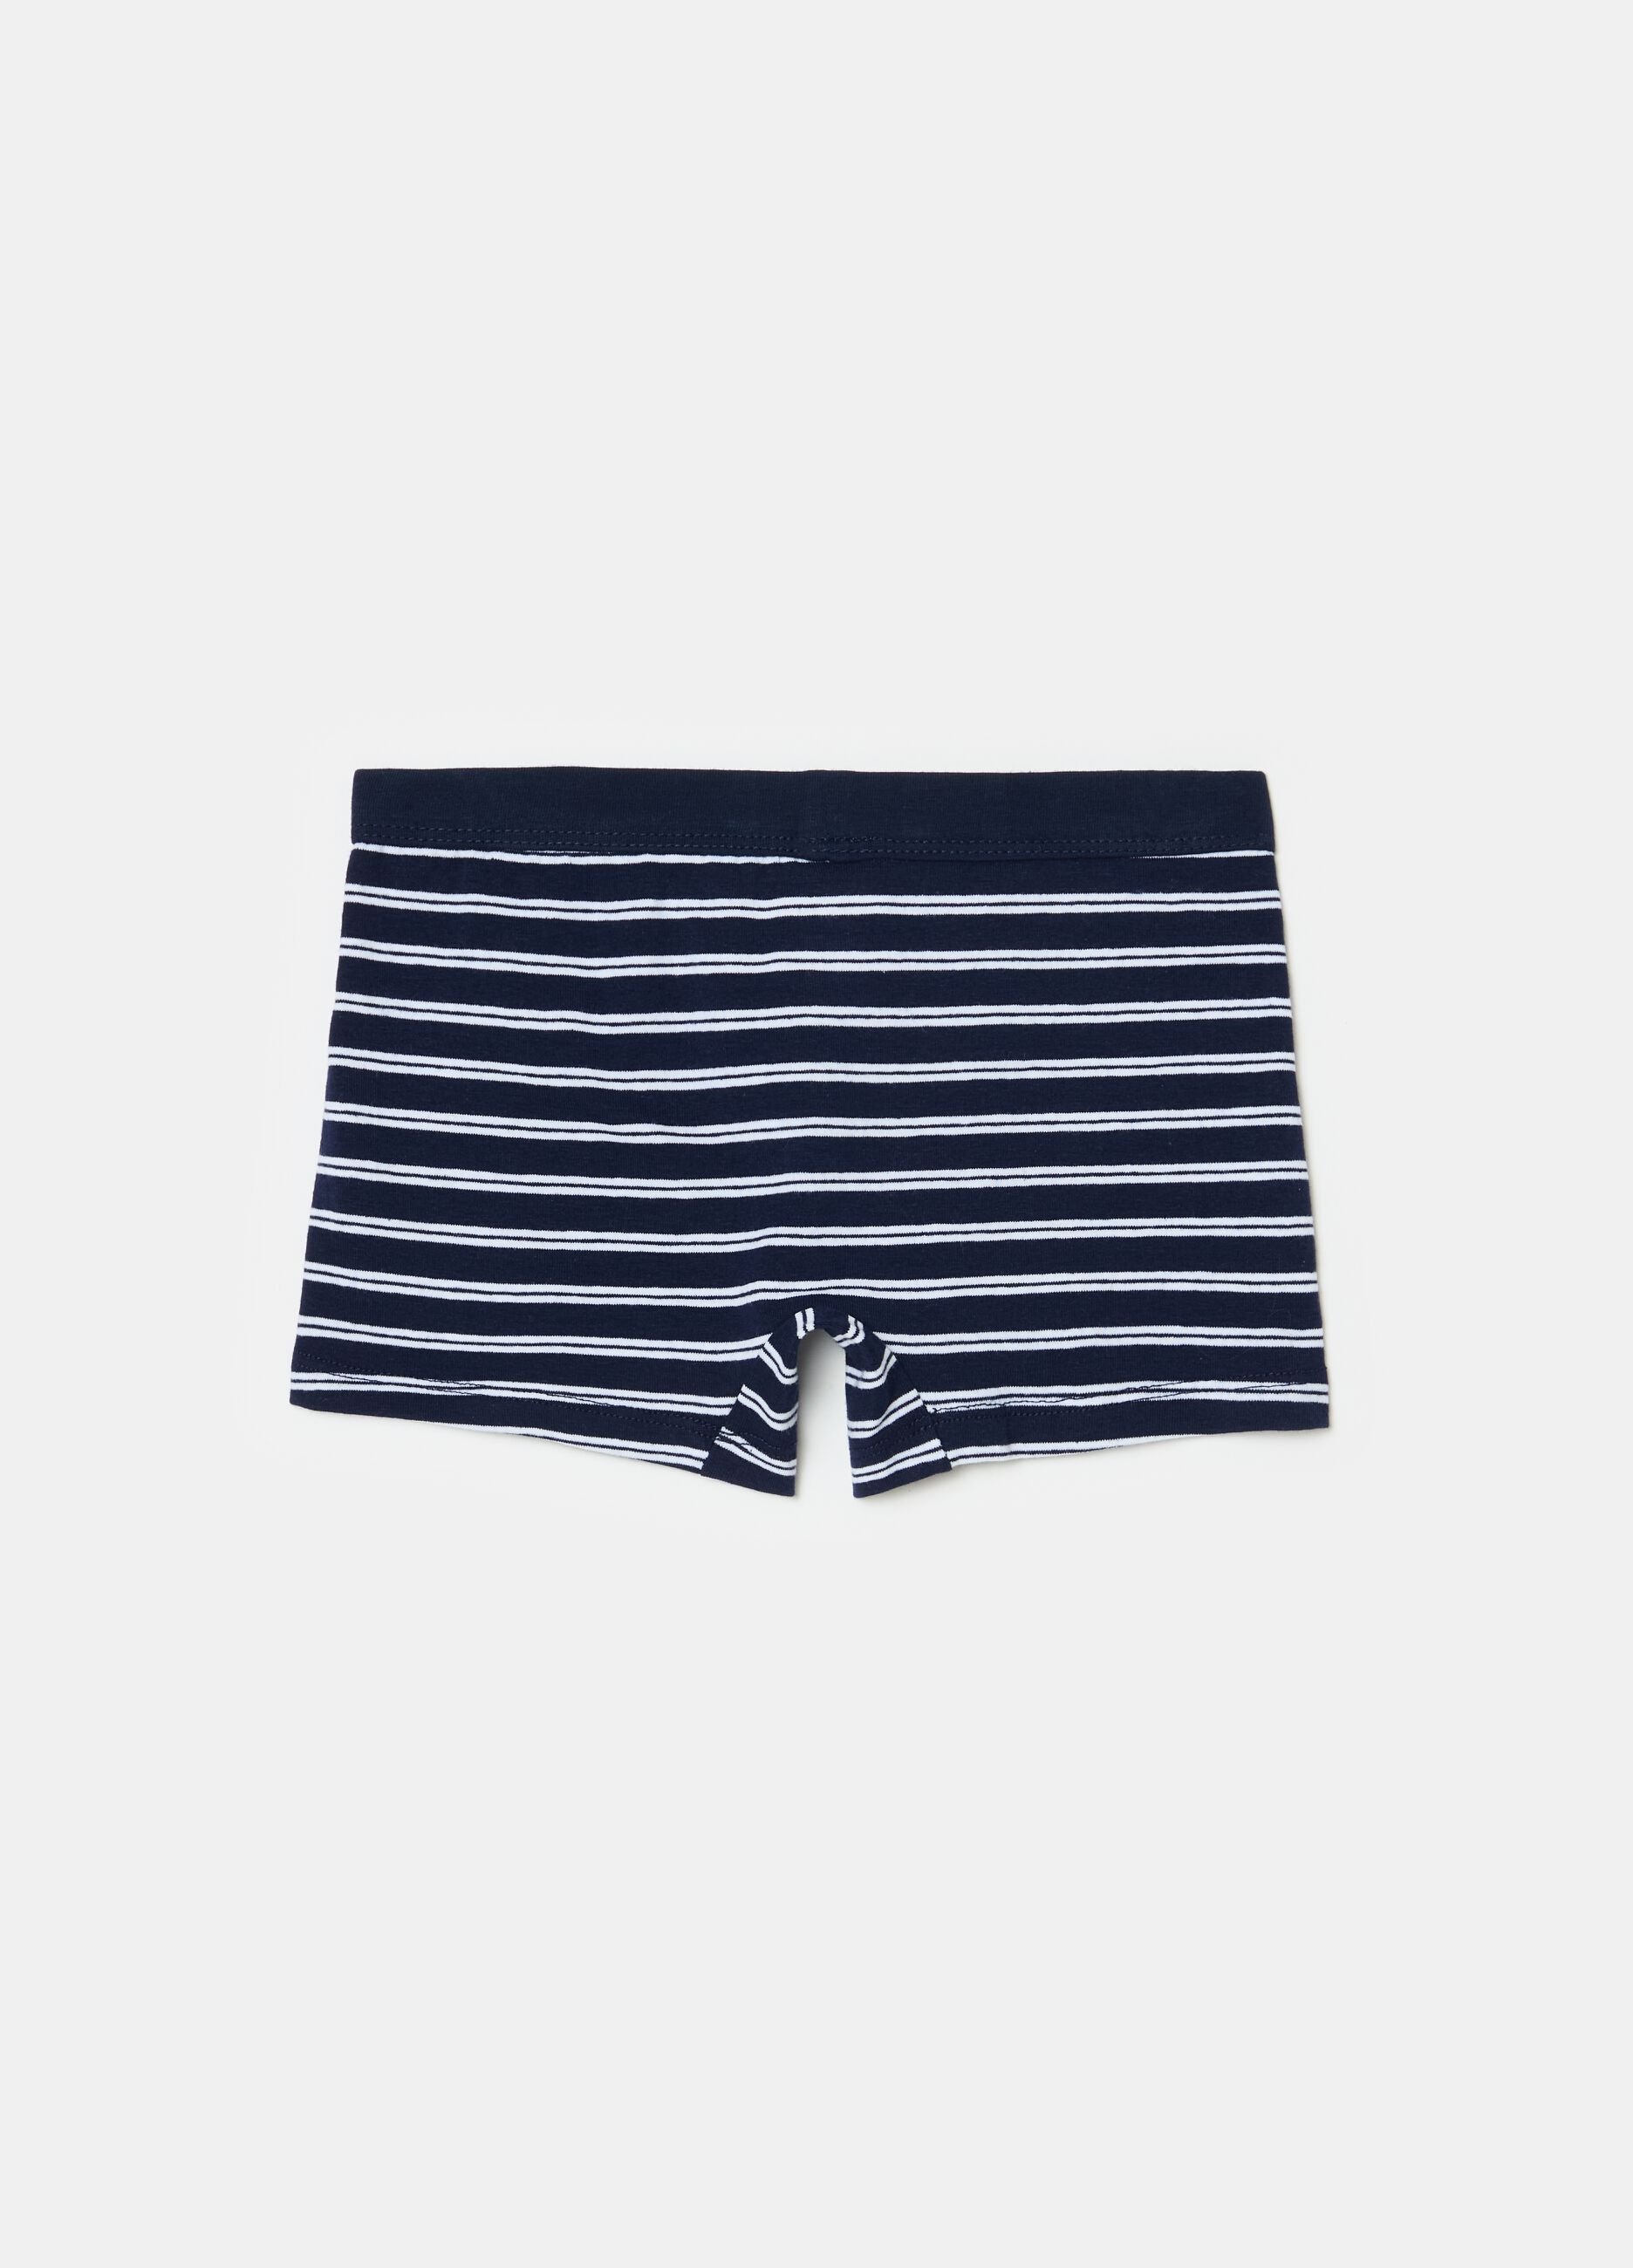 Organic cotton boxer shorts with striped pattern